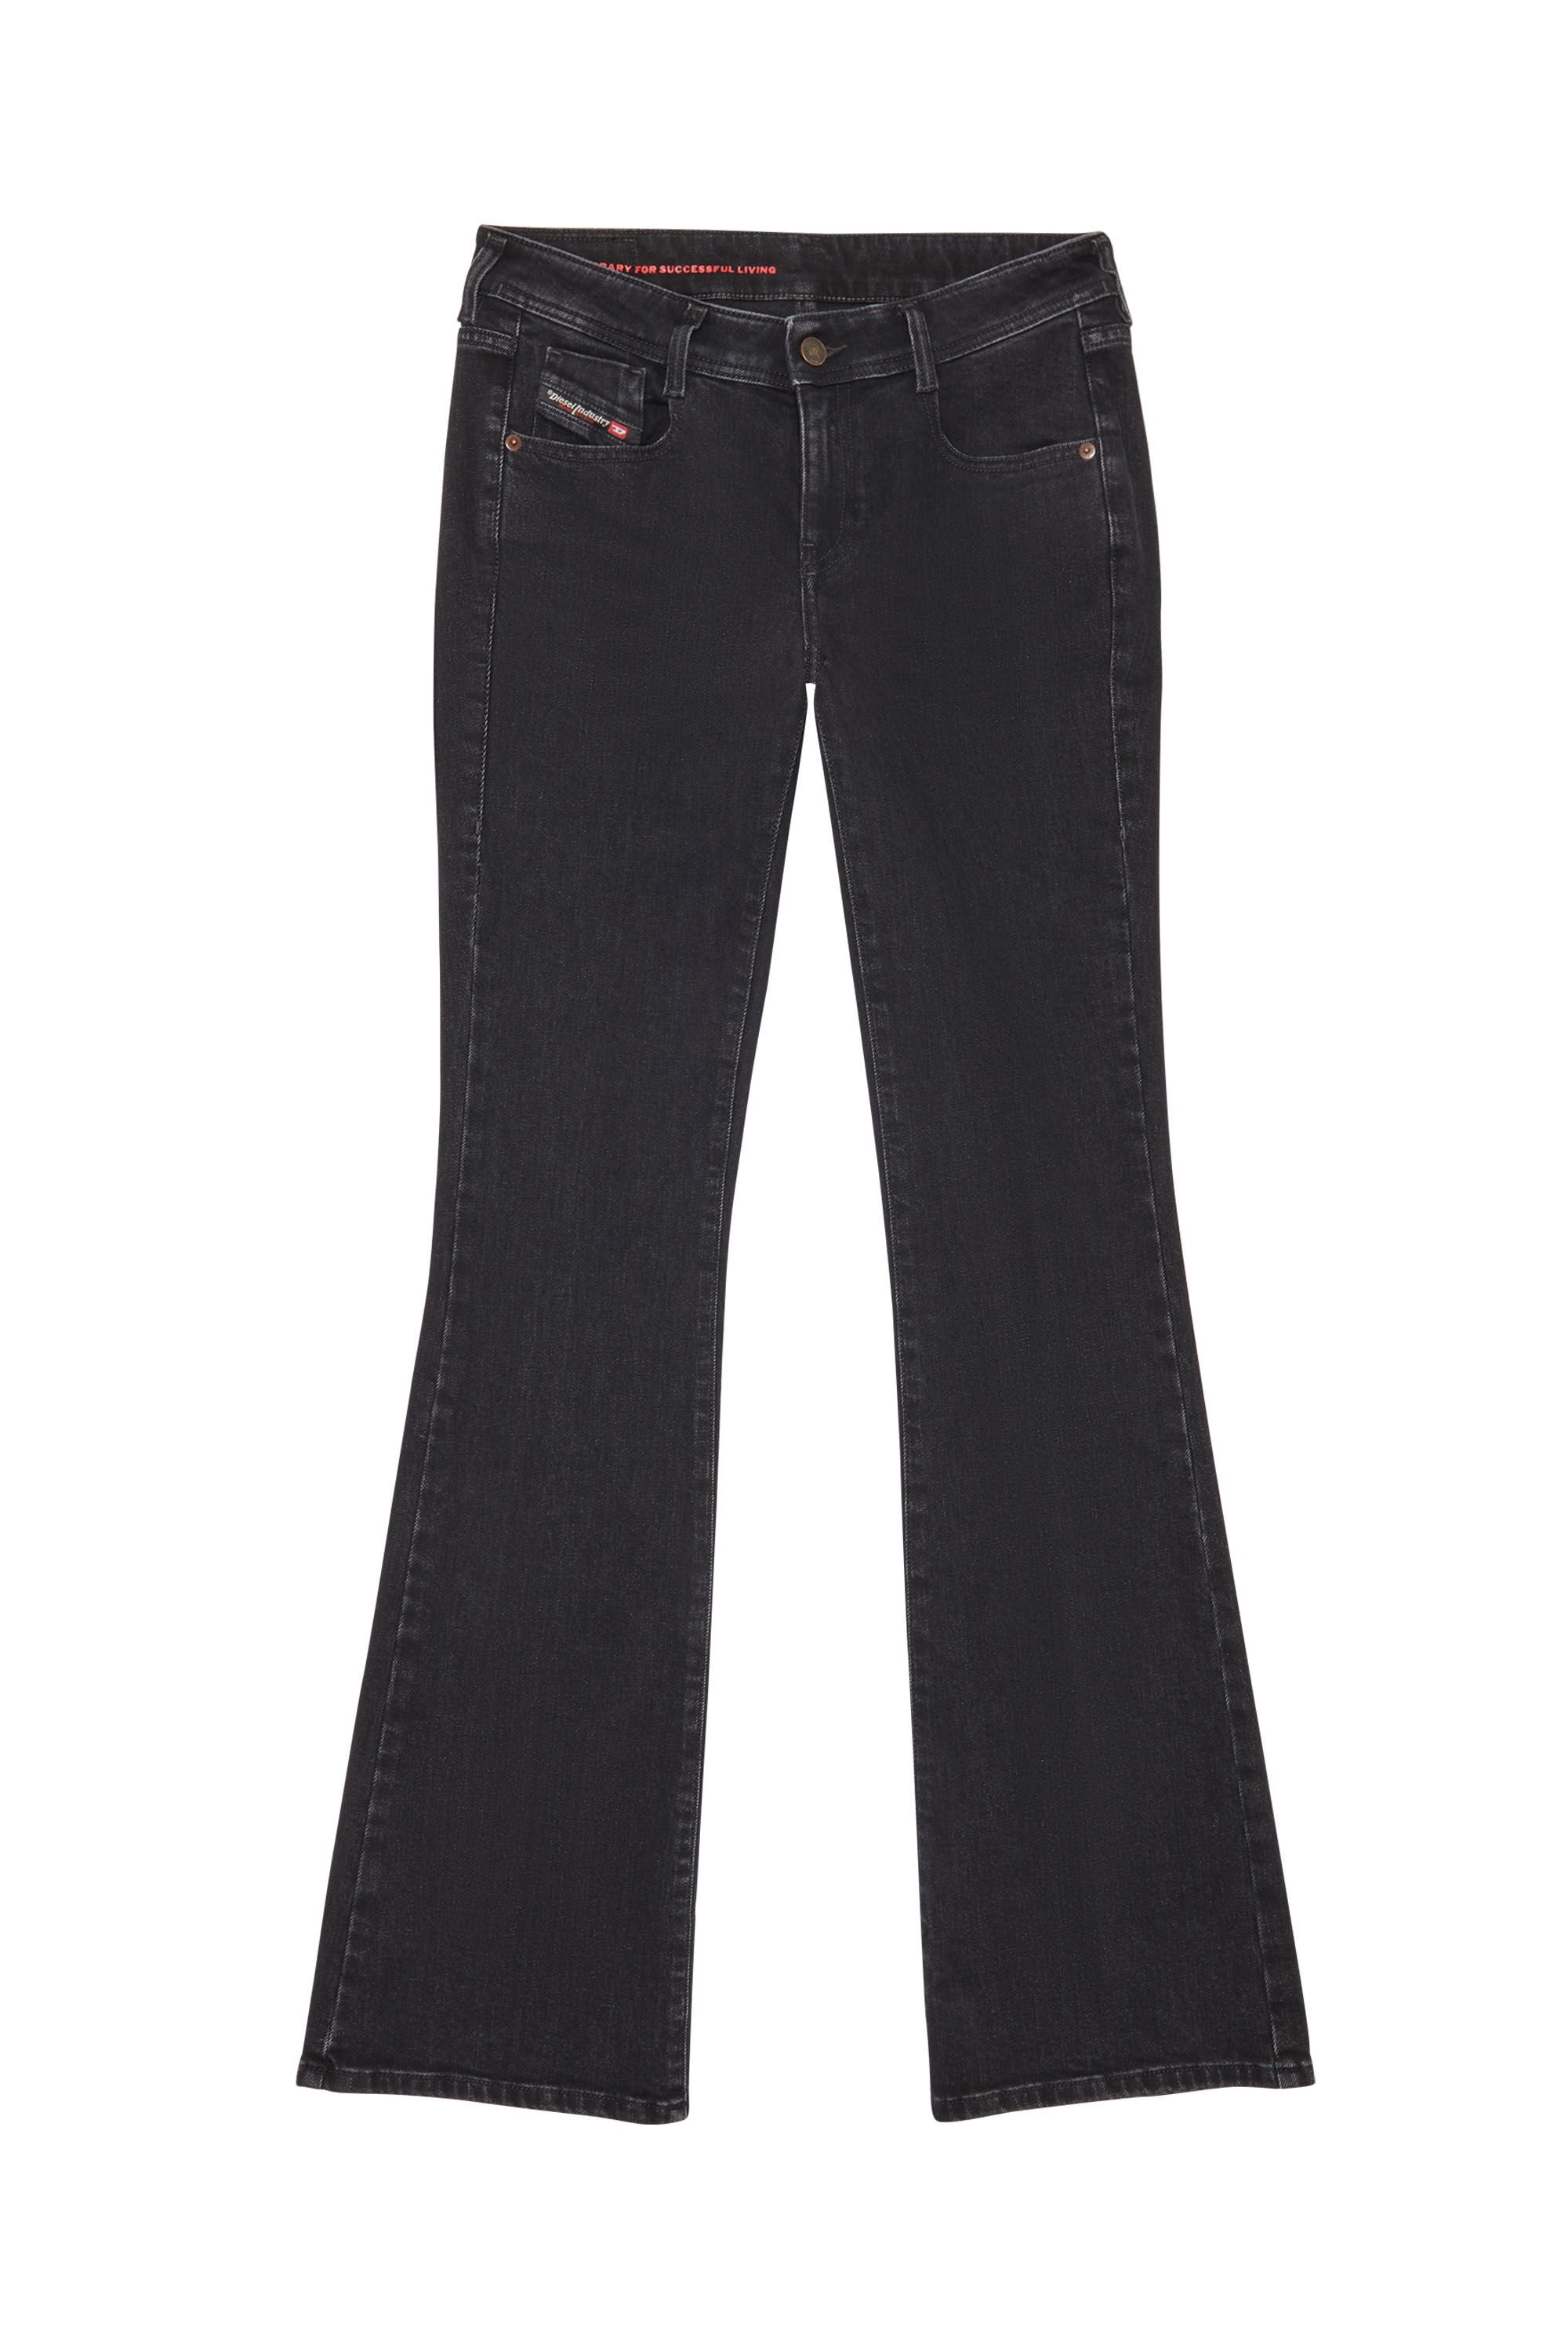 BOOTCUT AND FLARE JEANS 1969 D-EBBEY Z9C25 - 1